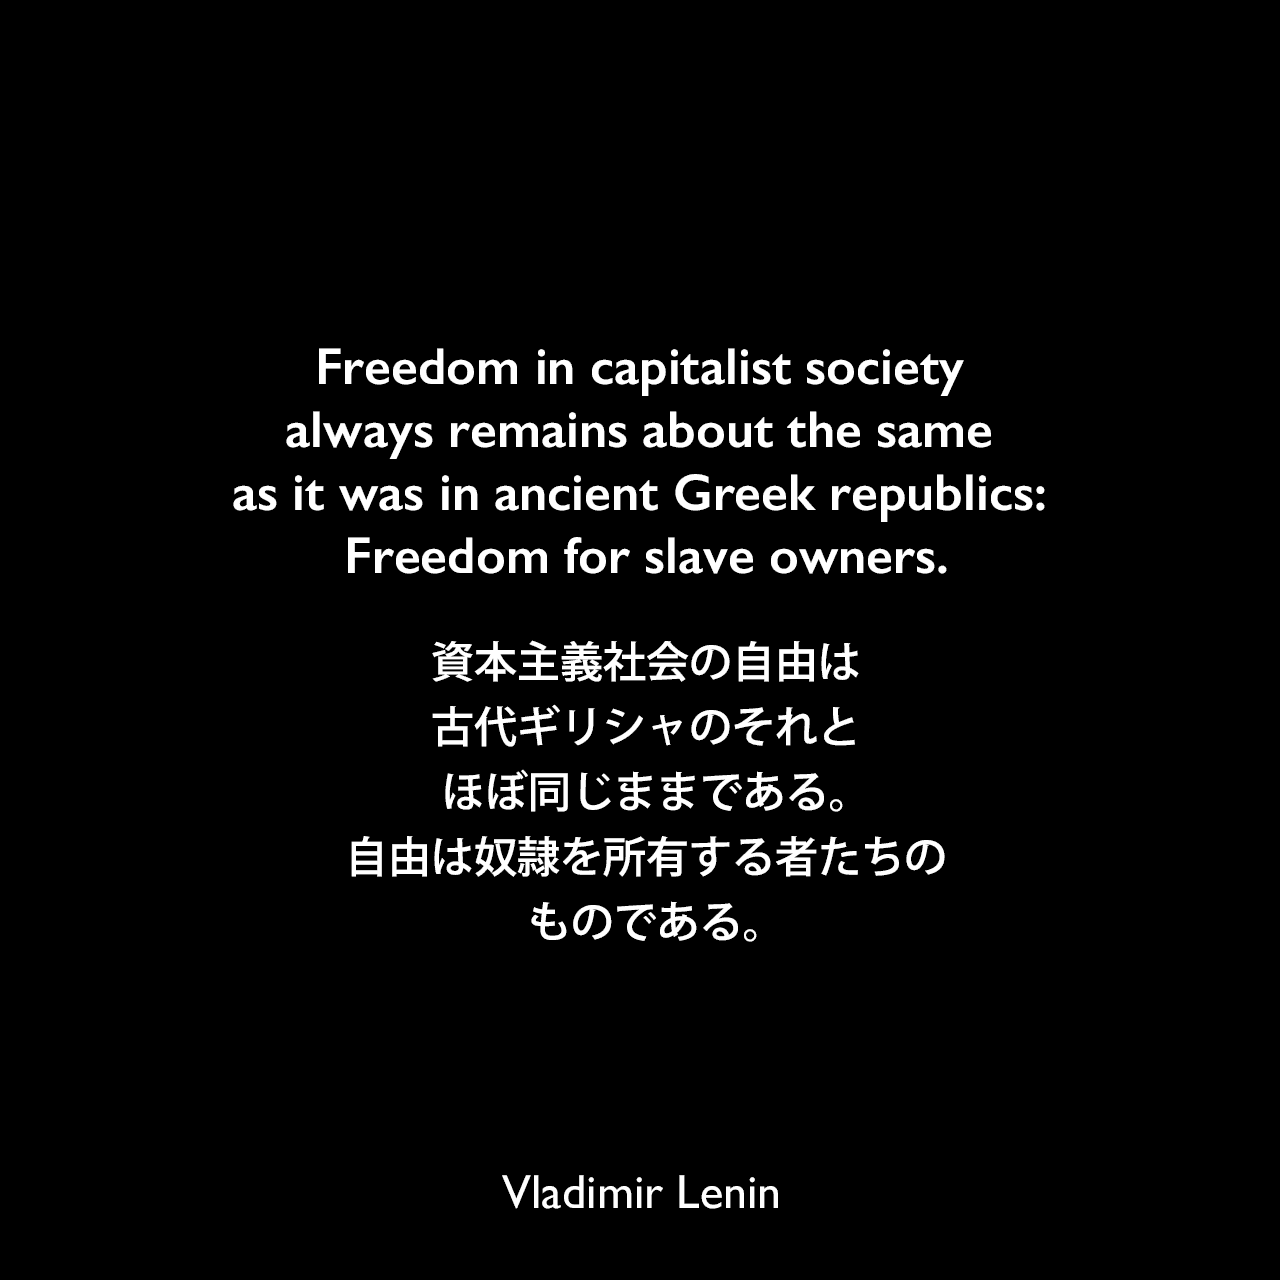 Freedom in capitalist society always remains about the same as it was in ancient Greek republics: Freedom for slave owners.資本主義社会の自由は、古代ギリシャのそれとほぼ同じままである。自由は奴隷を所有する者たちのものである。Vladimir Lenin